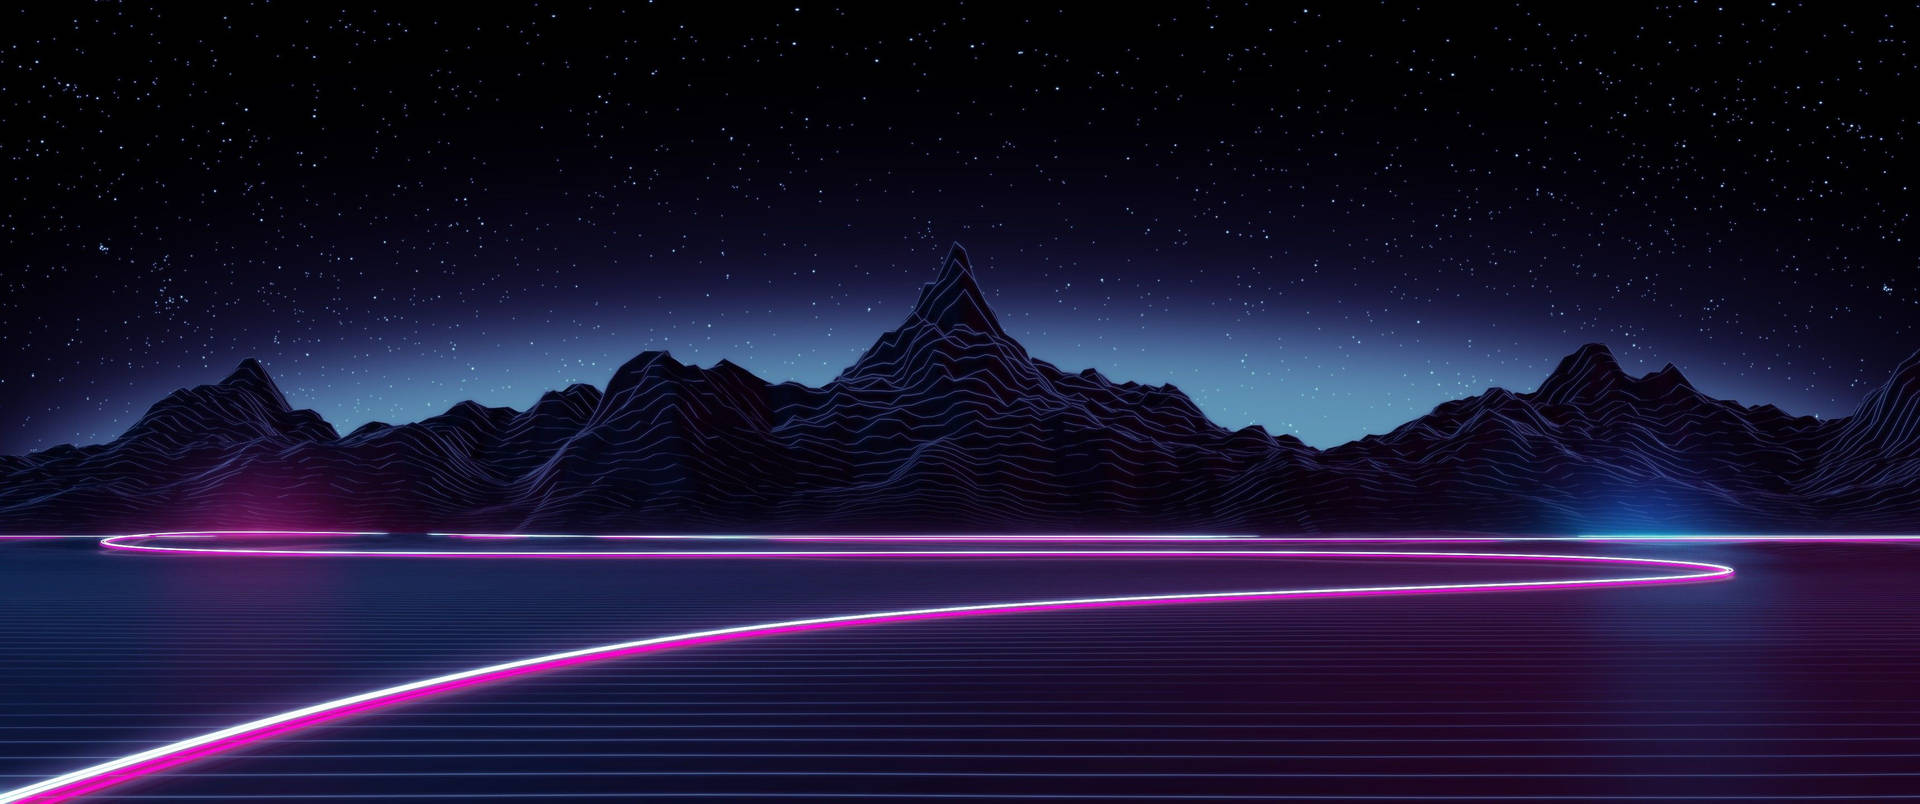 Synthwave Mountain Landscape